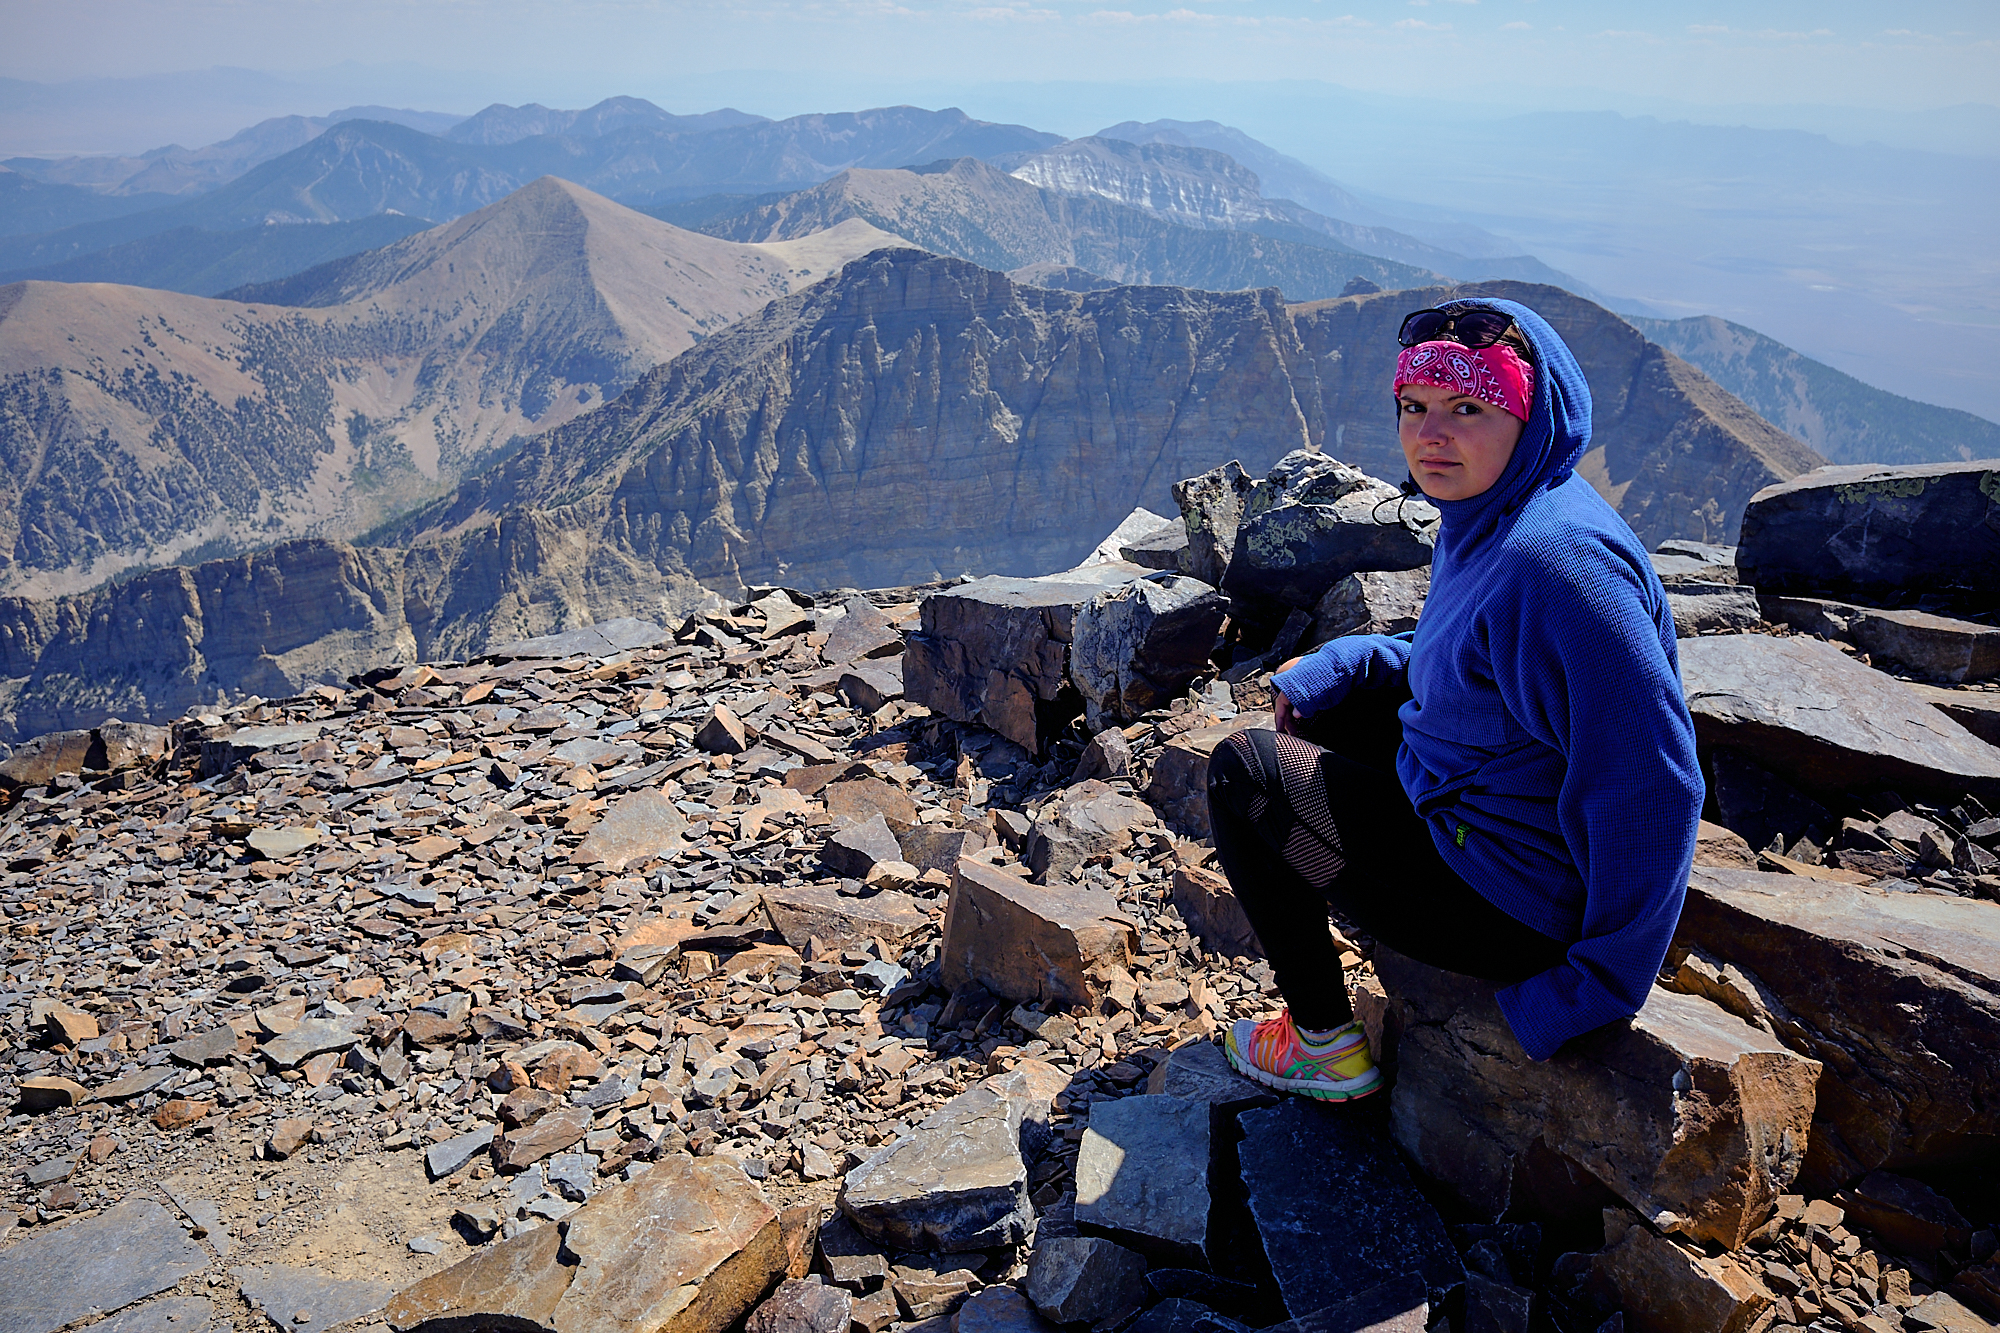  Dani on the summit of Wheeler Peak, very unhappy with what I just made her do. I told her we were just going on a hike but left out the detail that we were climbing to 13,000 feet in smoke filled air. | Great Basin National Park 8/18/18 